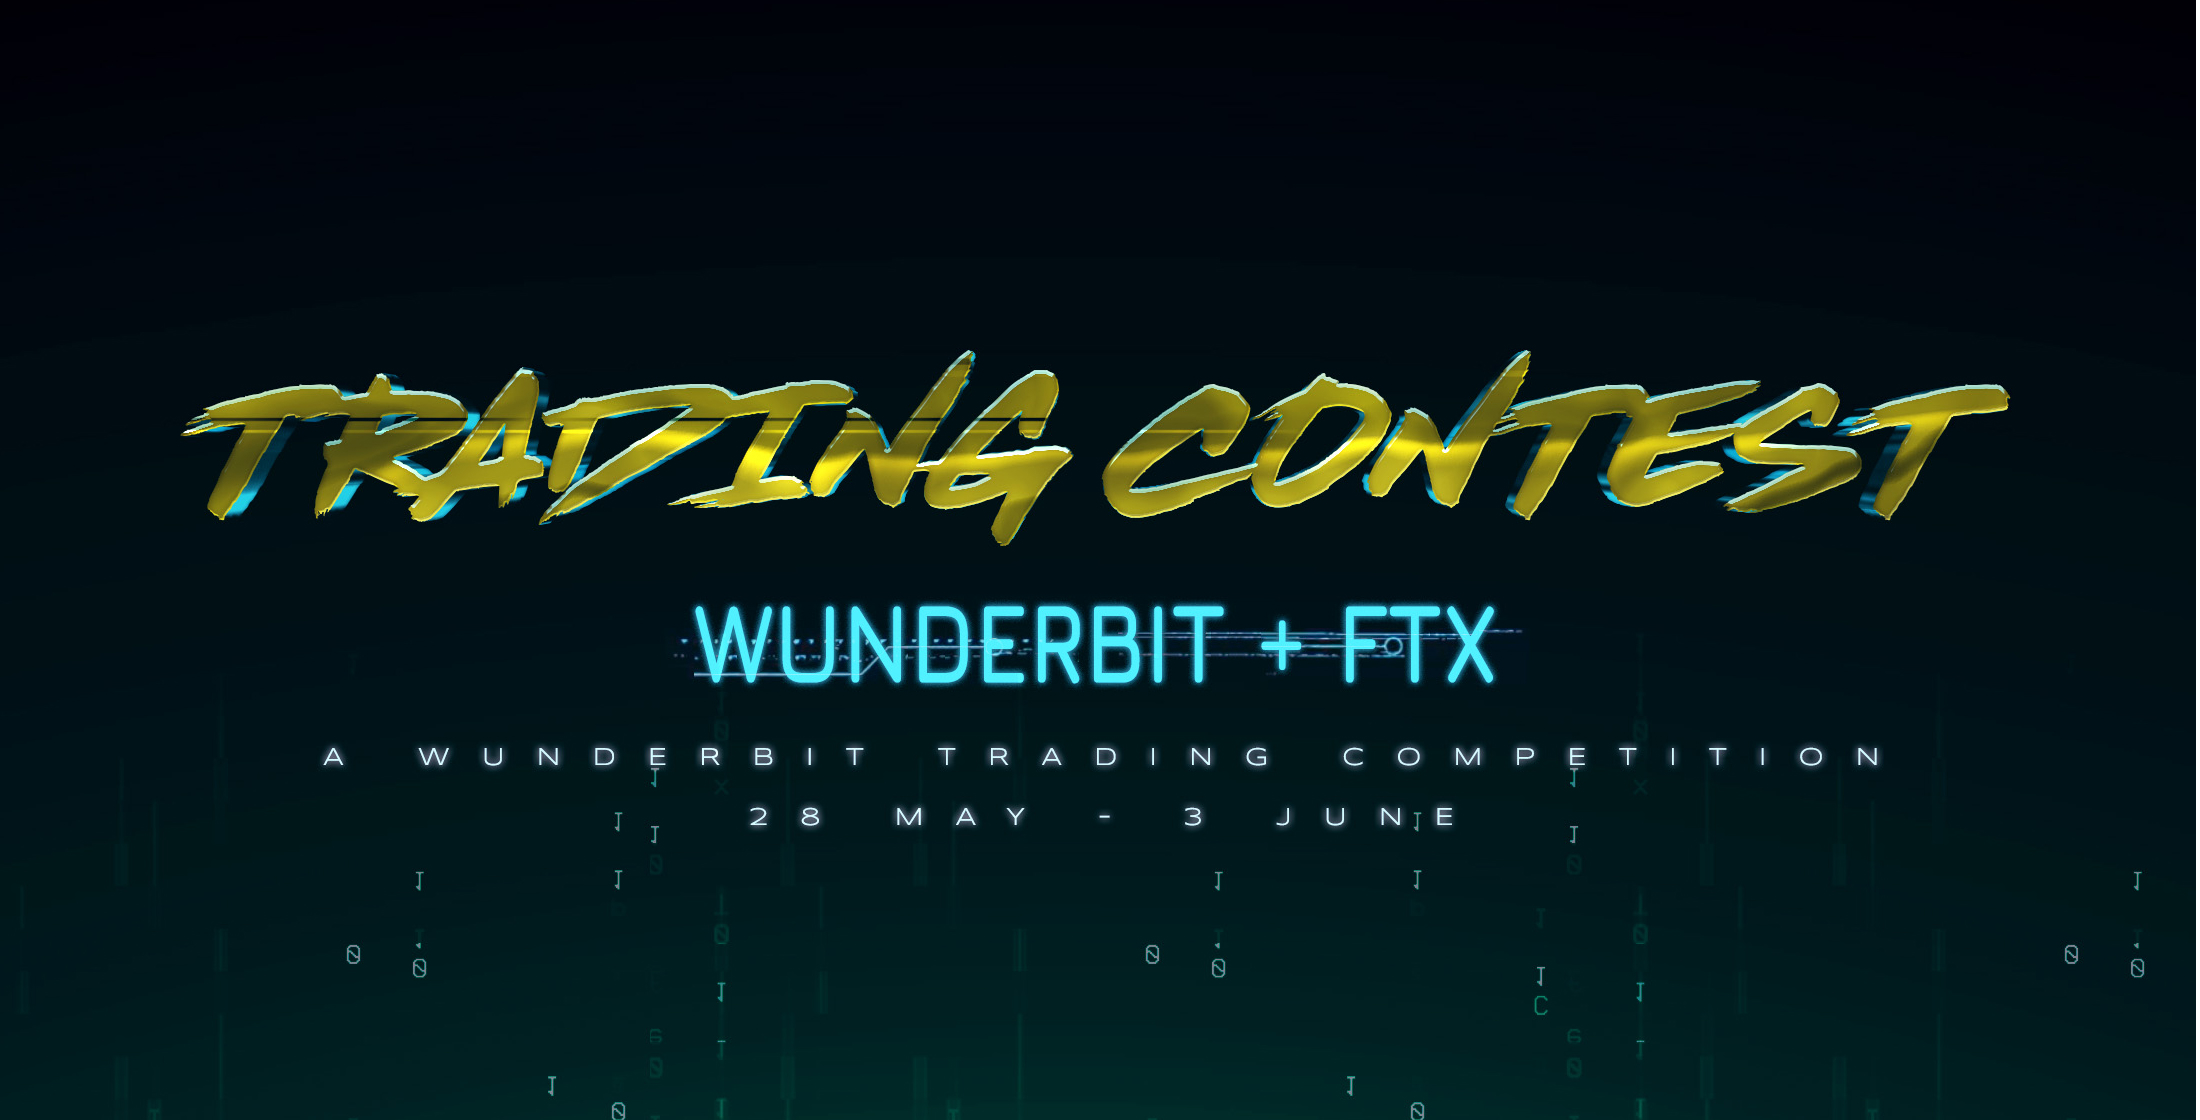 Trading Competition for Wunderbit Trading users